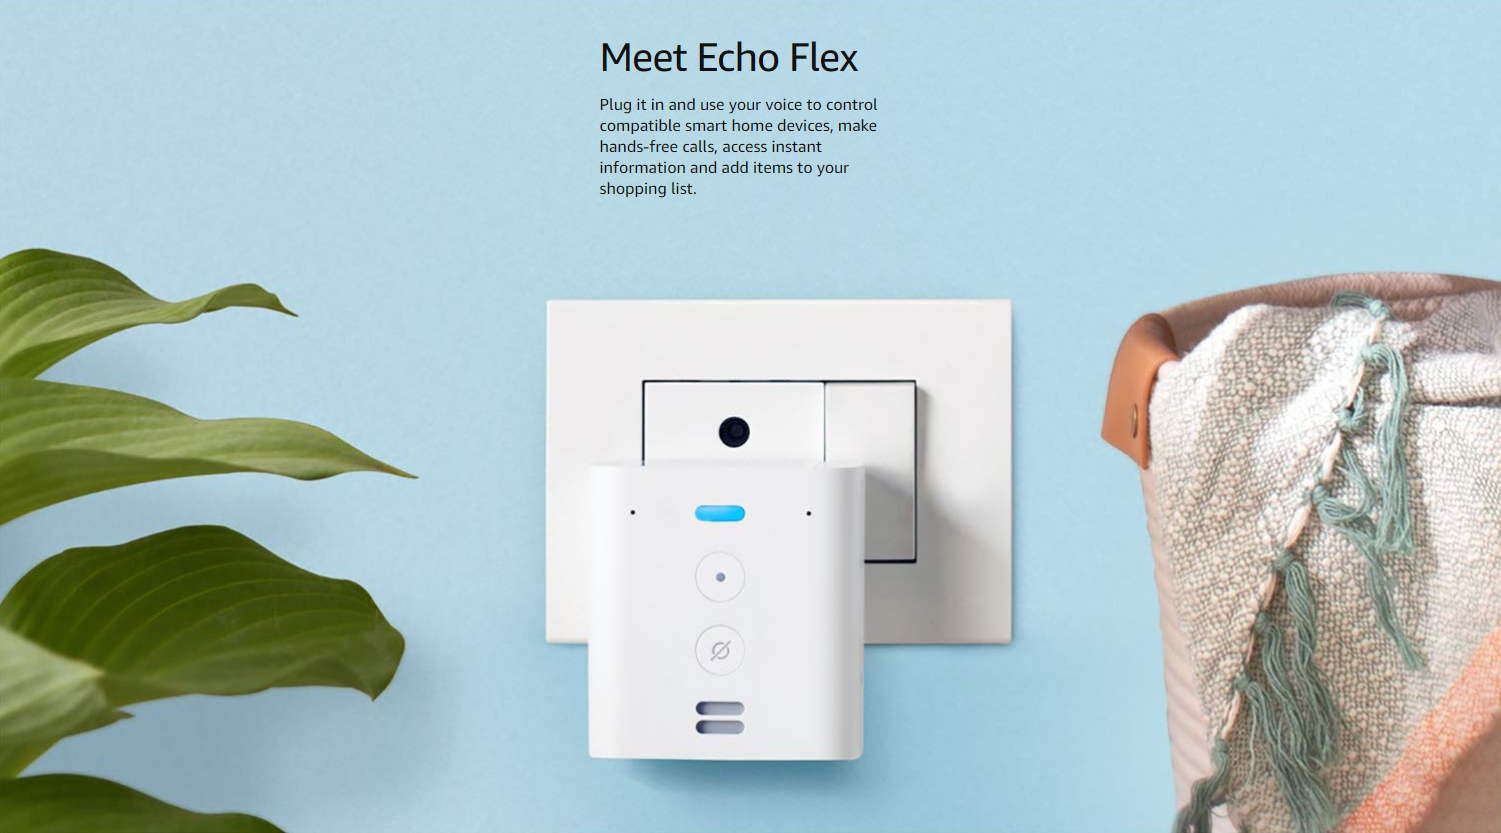 Echo Flex launched in India